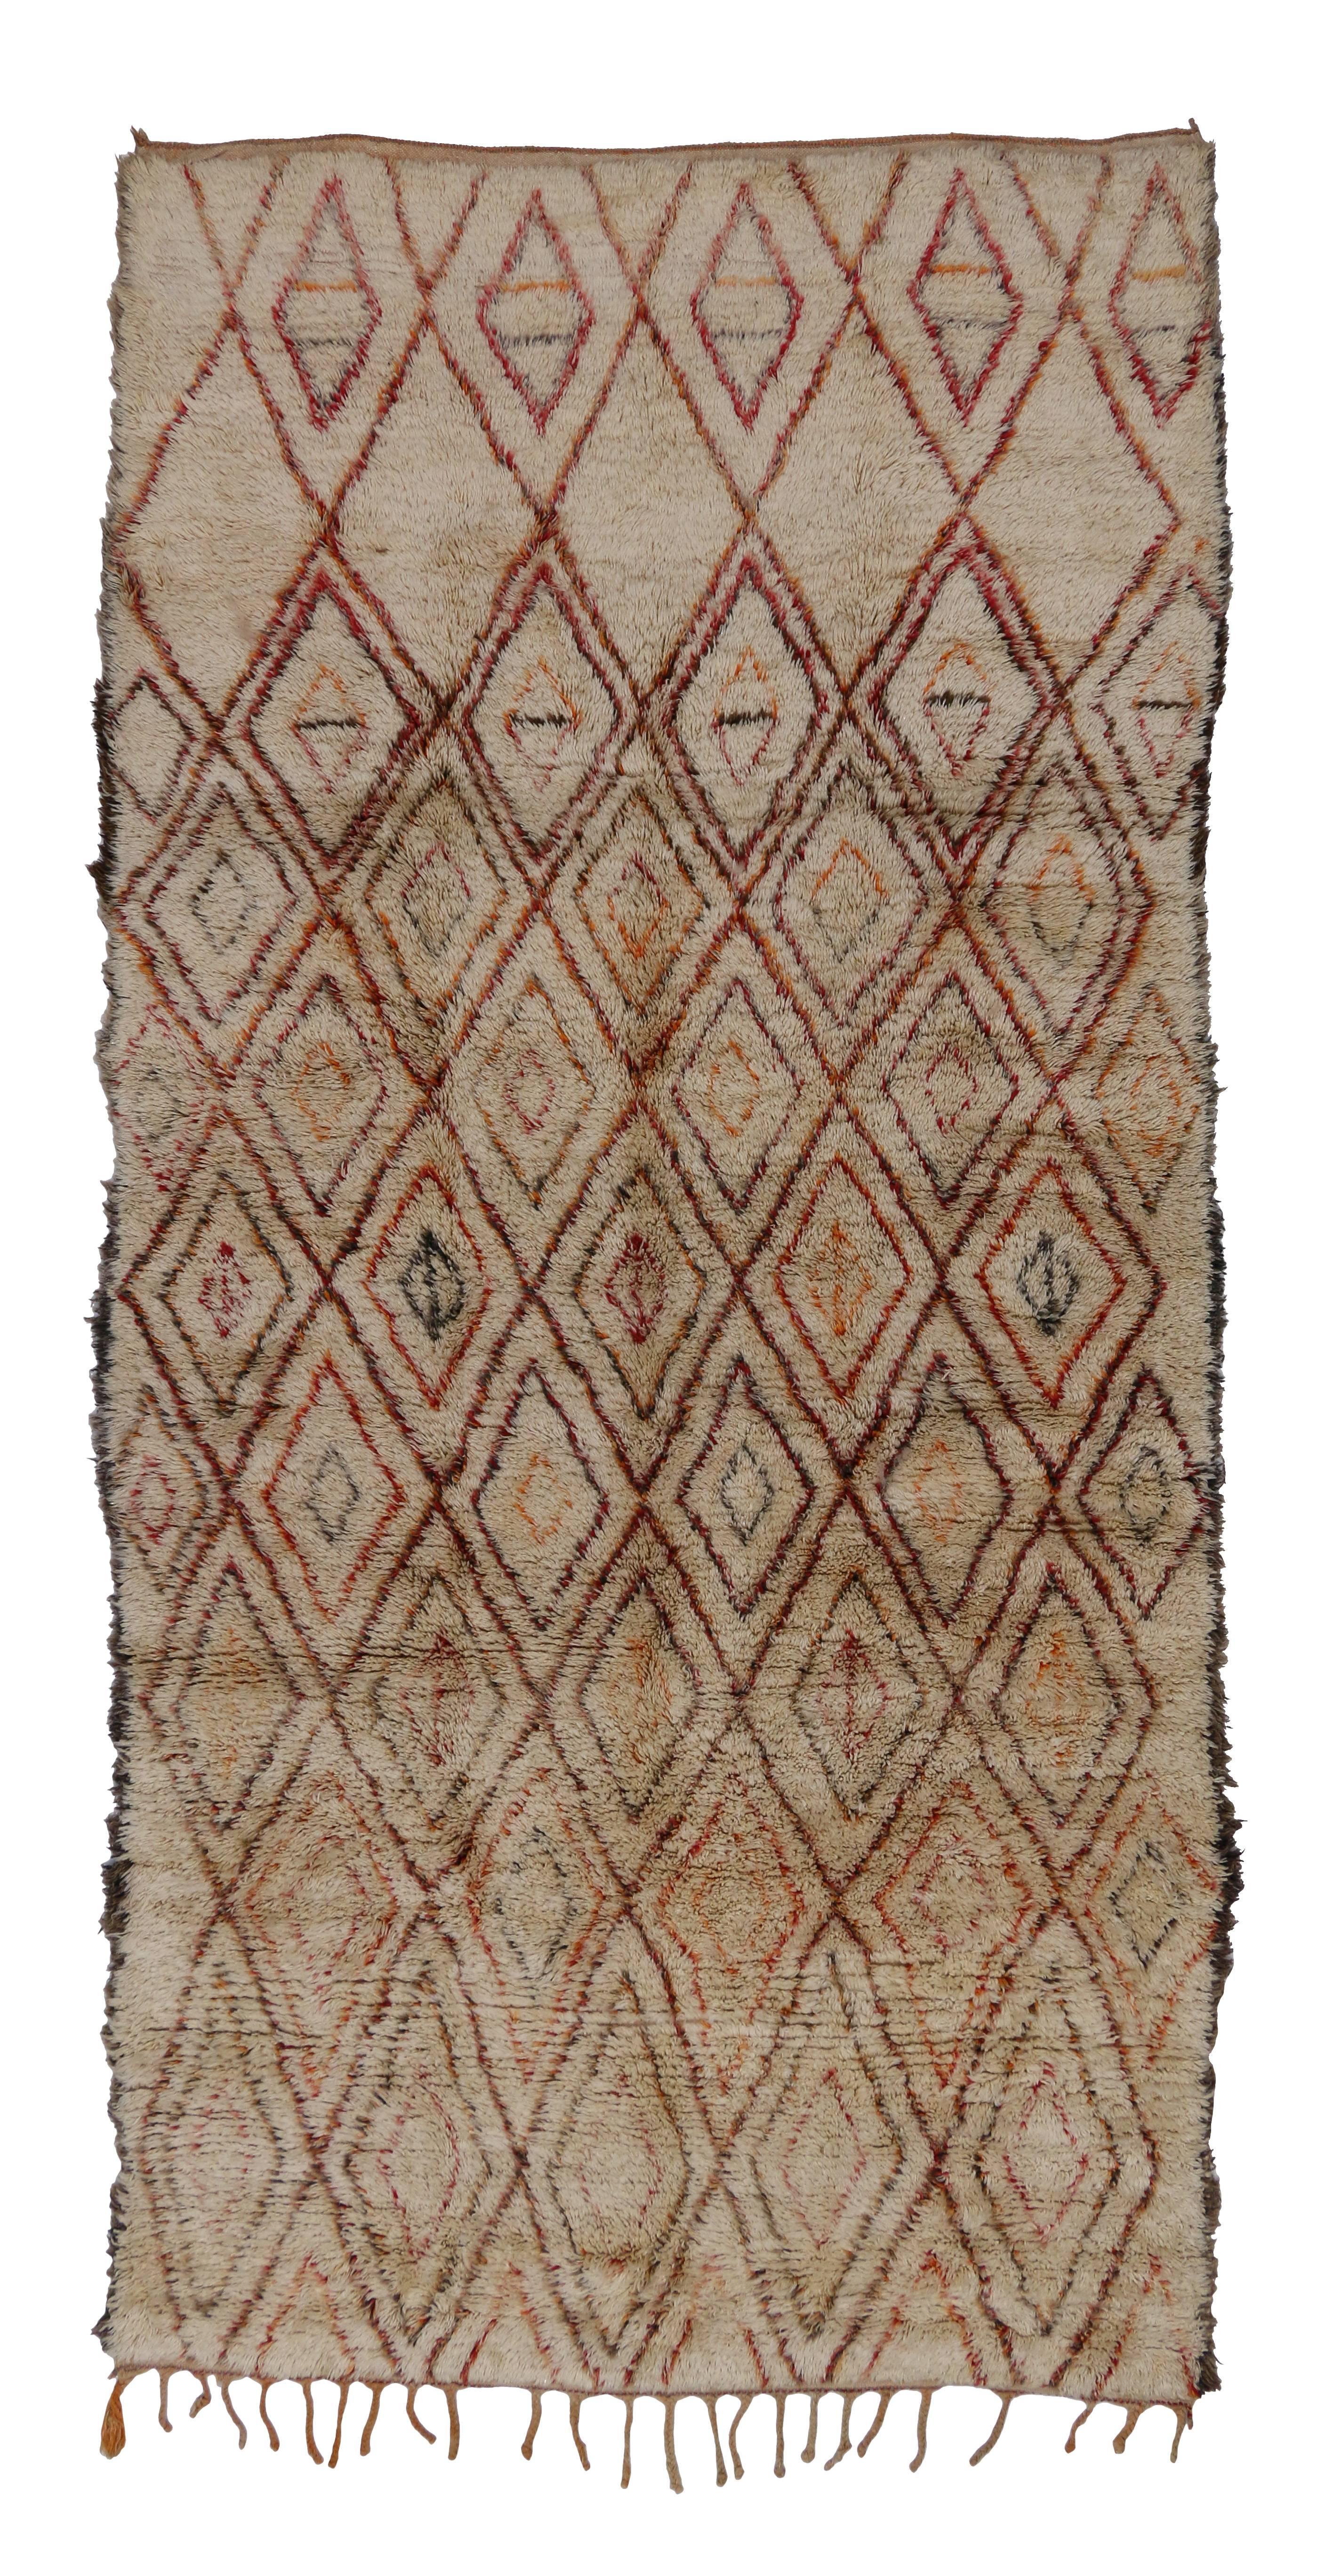 Mid-Century Modern Beni Ourain Moroccan Rug with Tribal Designs 4